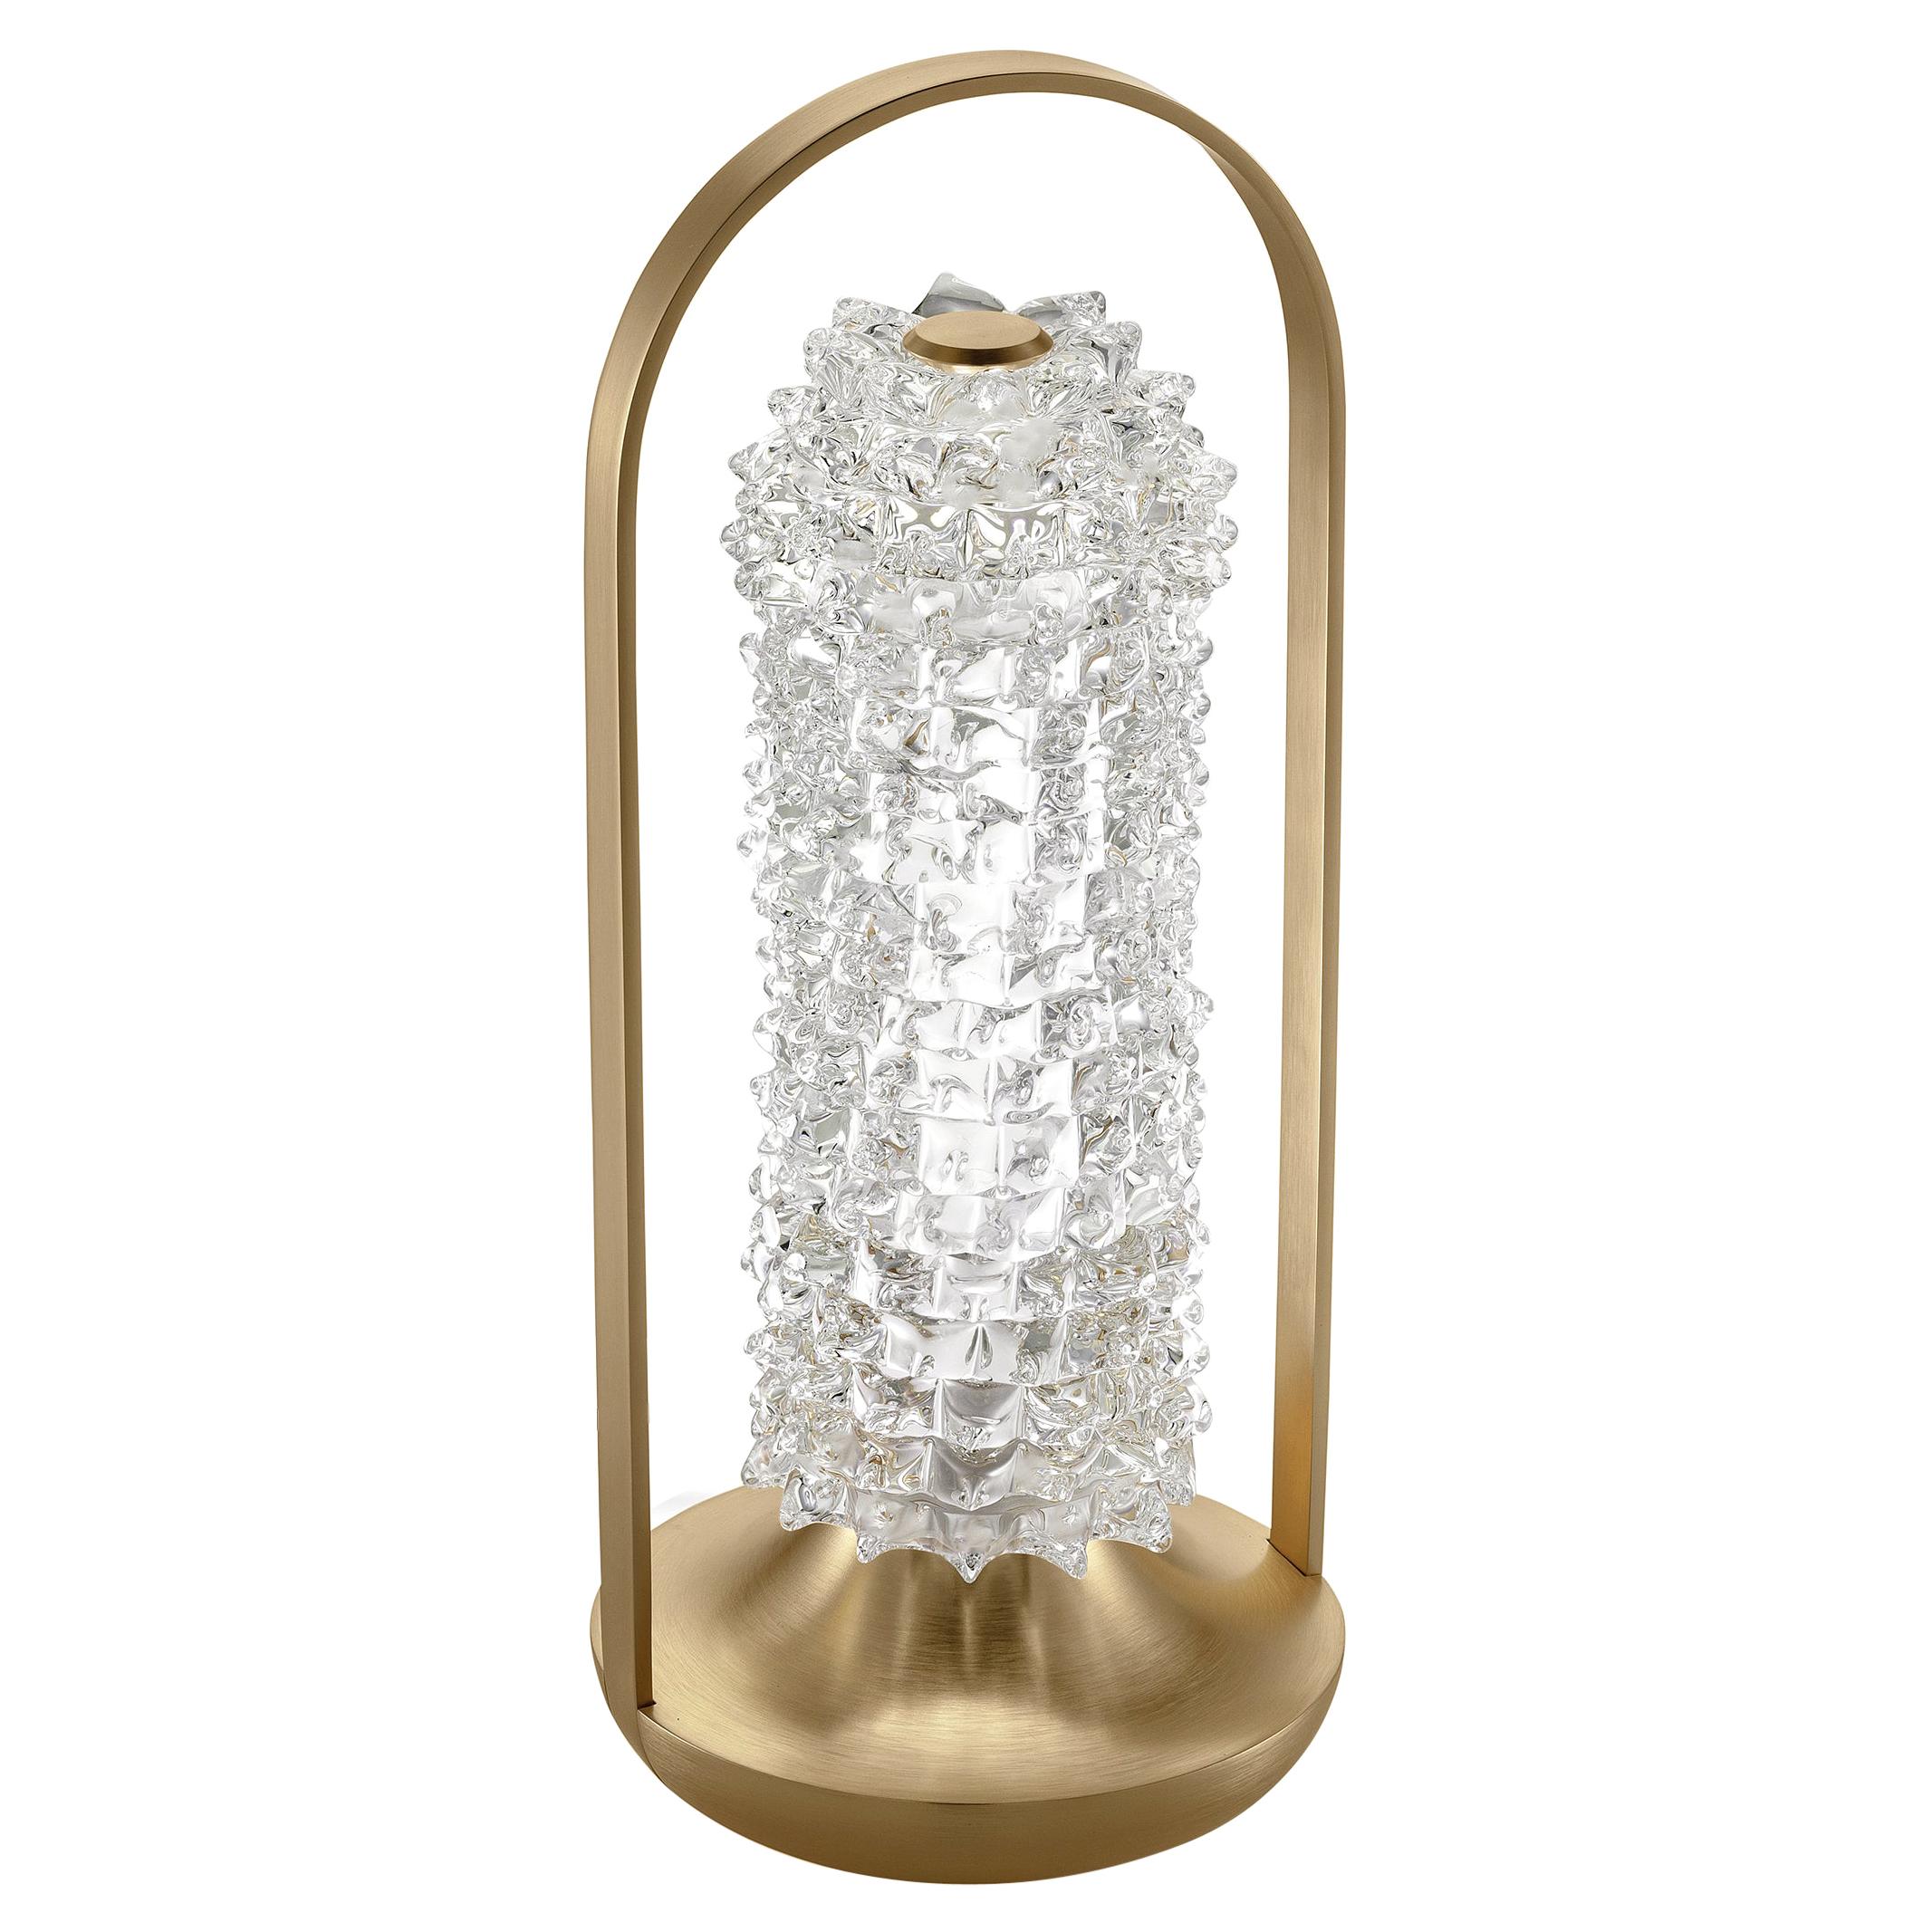 Barovier & Toso Opera 7391 Table Lamp in Crystal with Black Nickel Finish